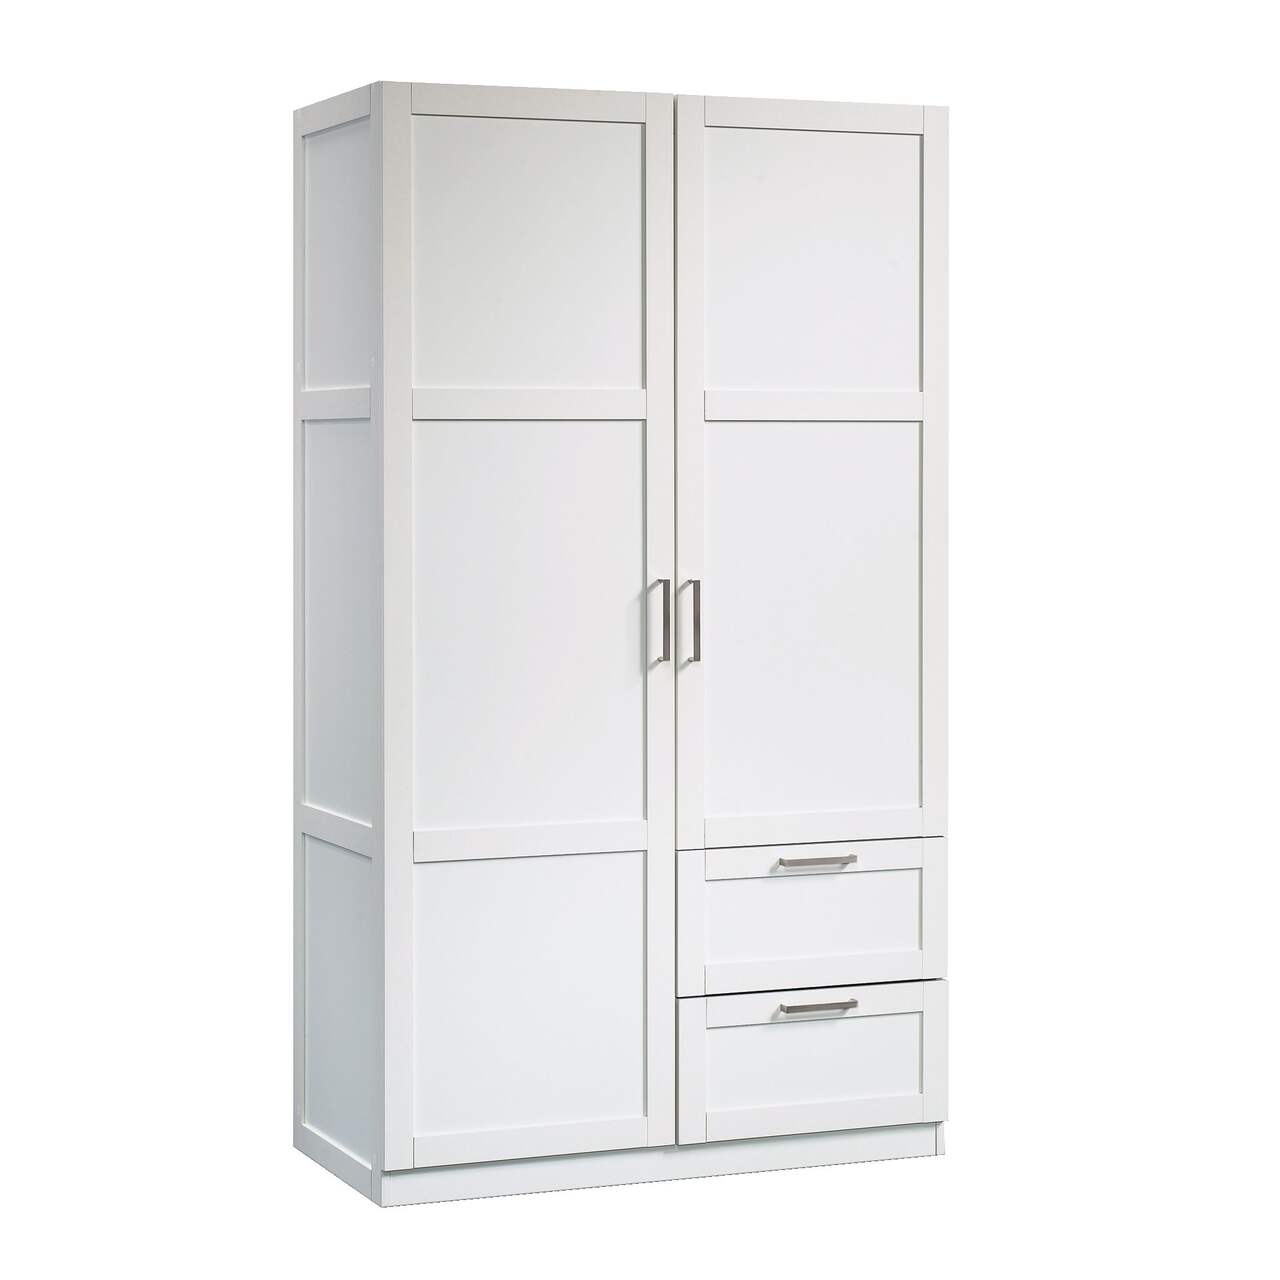 https://media-www.canadiantire.ca/product/living/home-decor/furniture/1680091/sauder-2-door-2-drawer-wardrobe-white-c655a3c2-2237-4d01-8c9a-152459f24d1c-jpgrendition.jpg?imdensity=1&imwidth=640&impolicy=mZoom